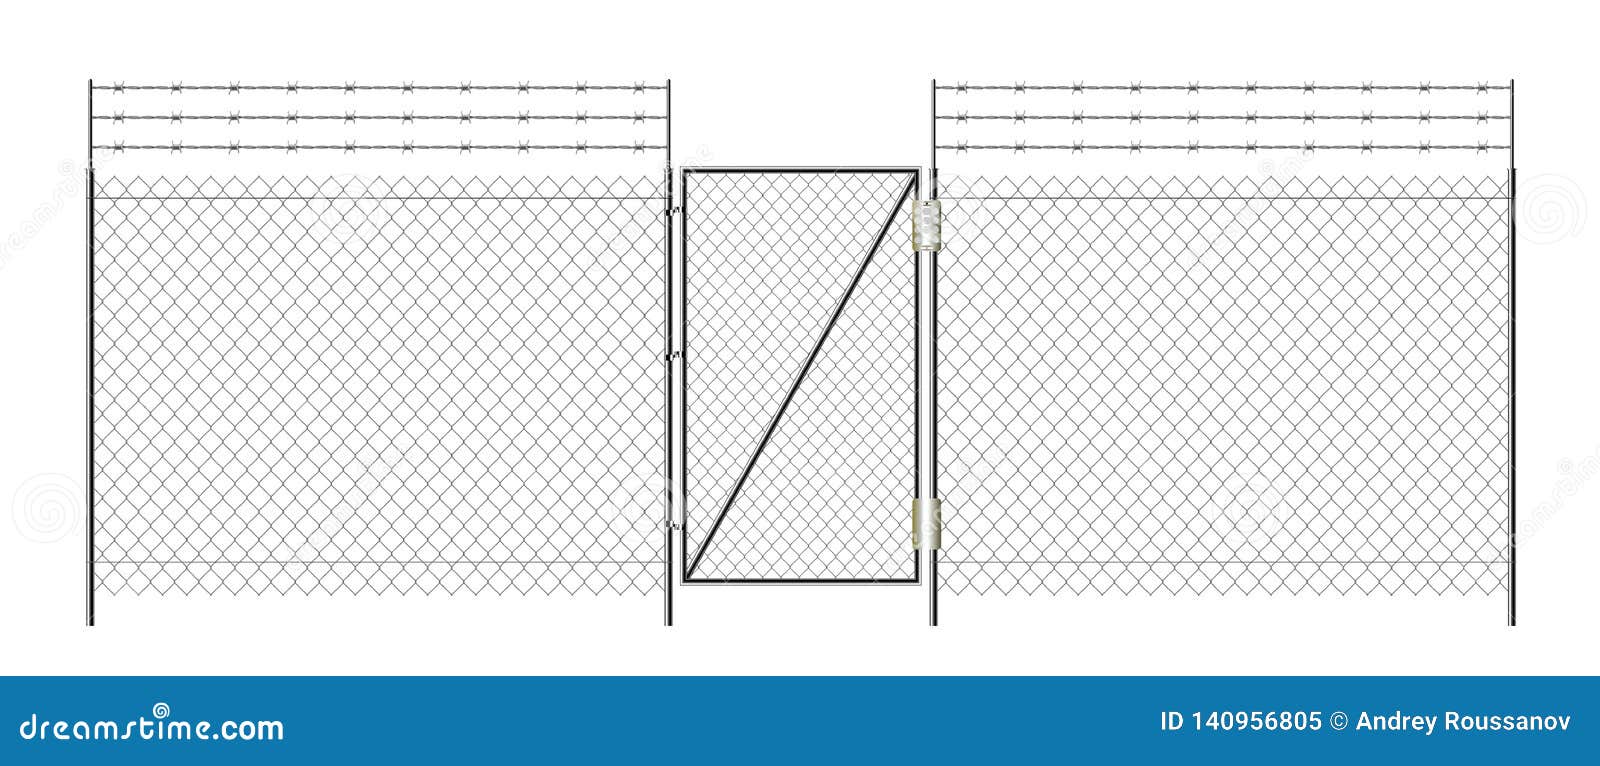 Realistic Metal Chain Link Fence Stock Vector Illustration Of Lock Illustration 140956805,Low Cost Small House Design Plans 3d